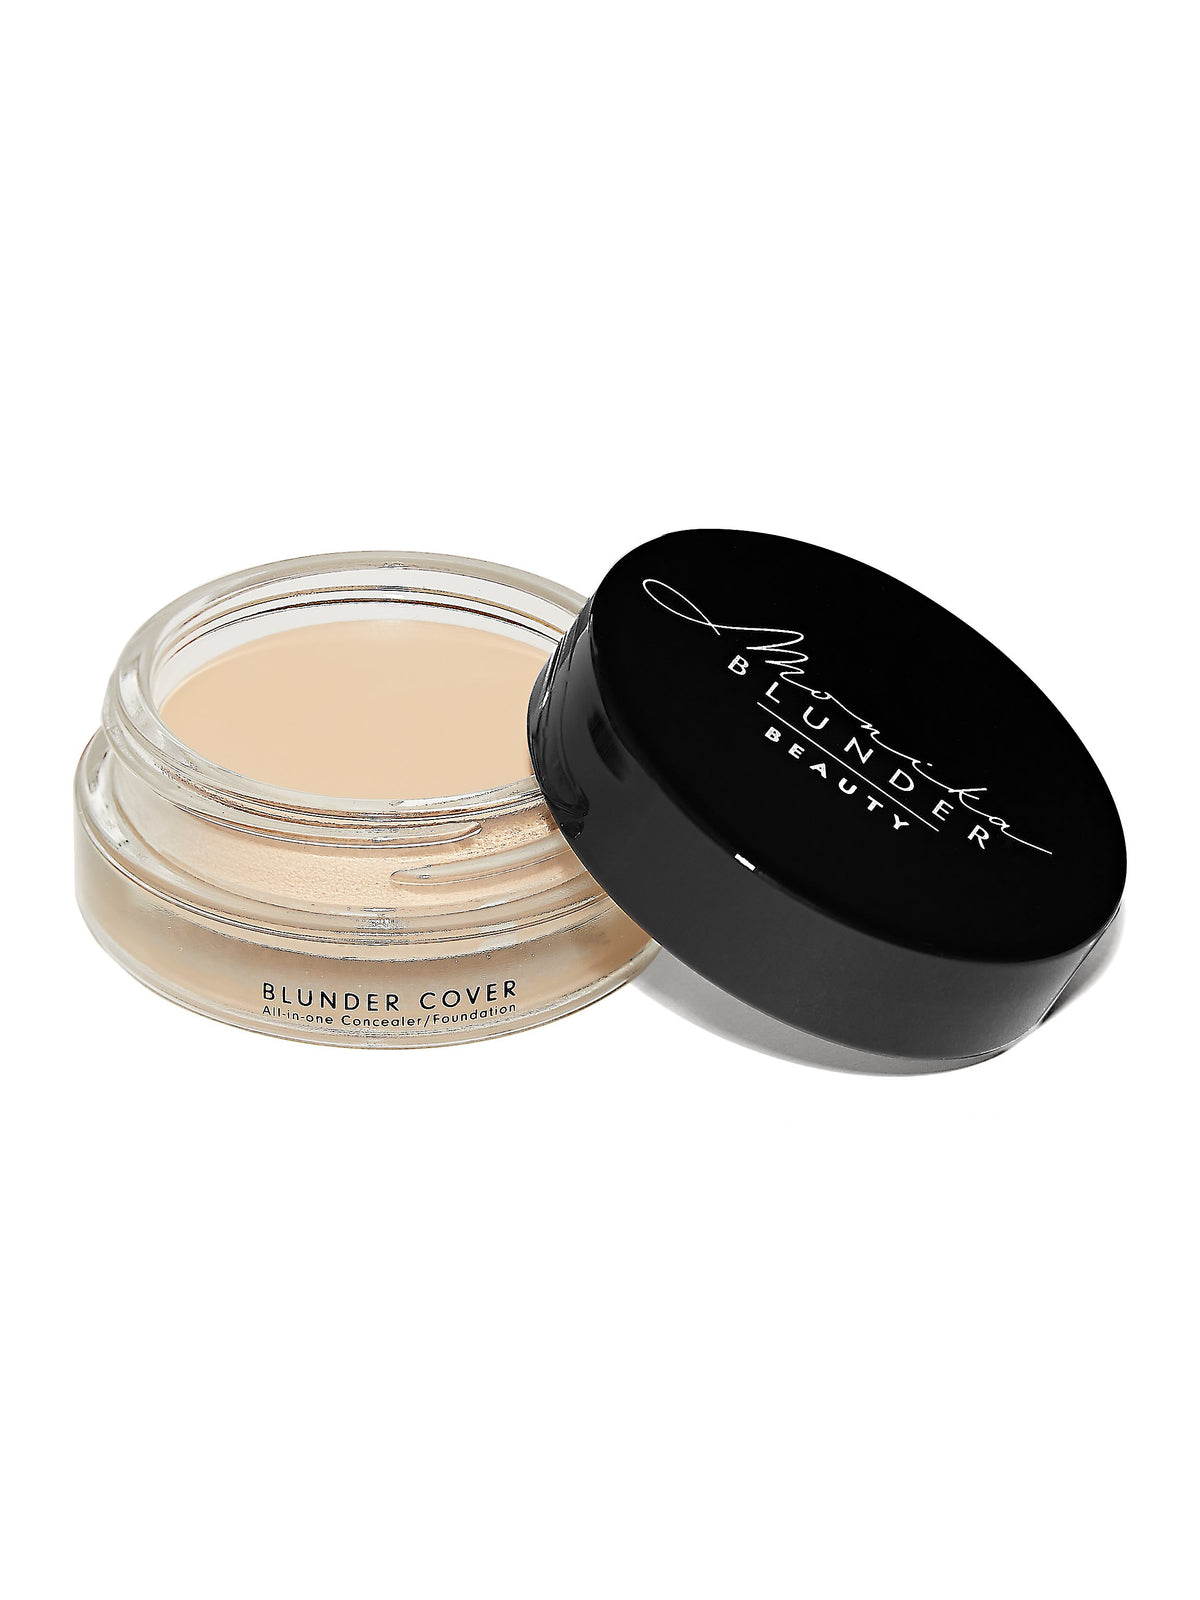 1 EINS Blunder Cover All-in-One Concealer/ Foundation